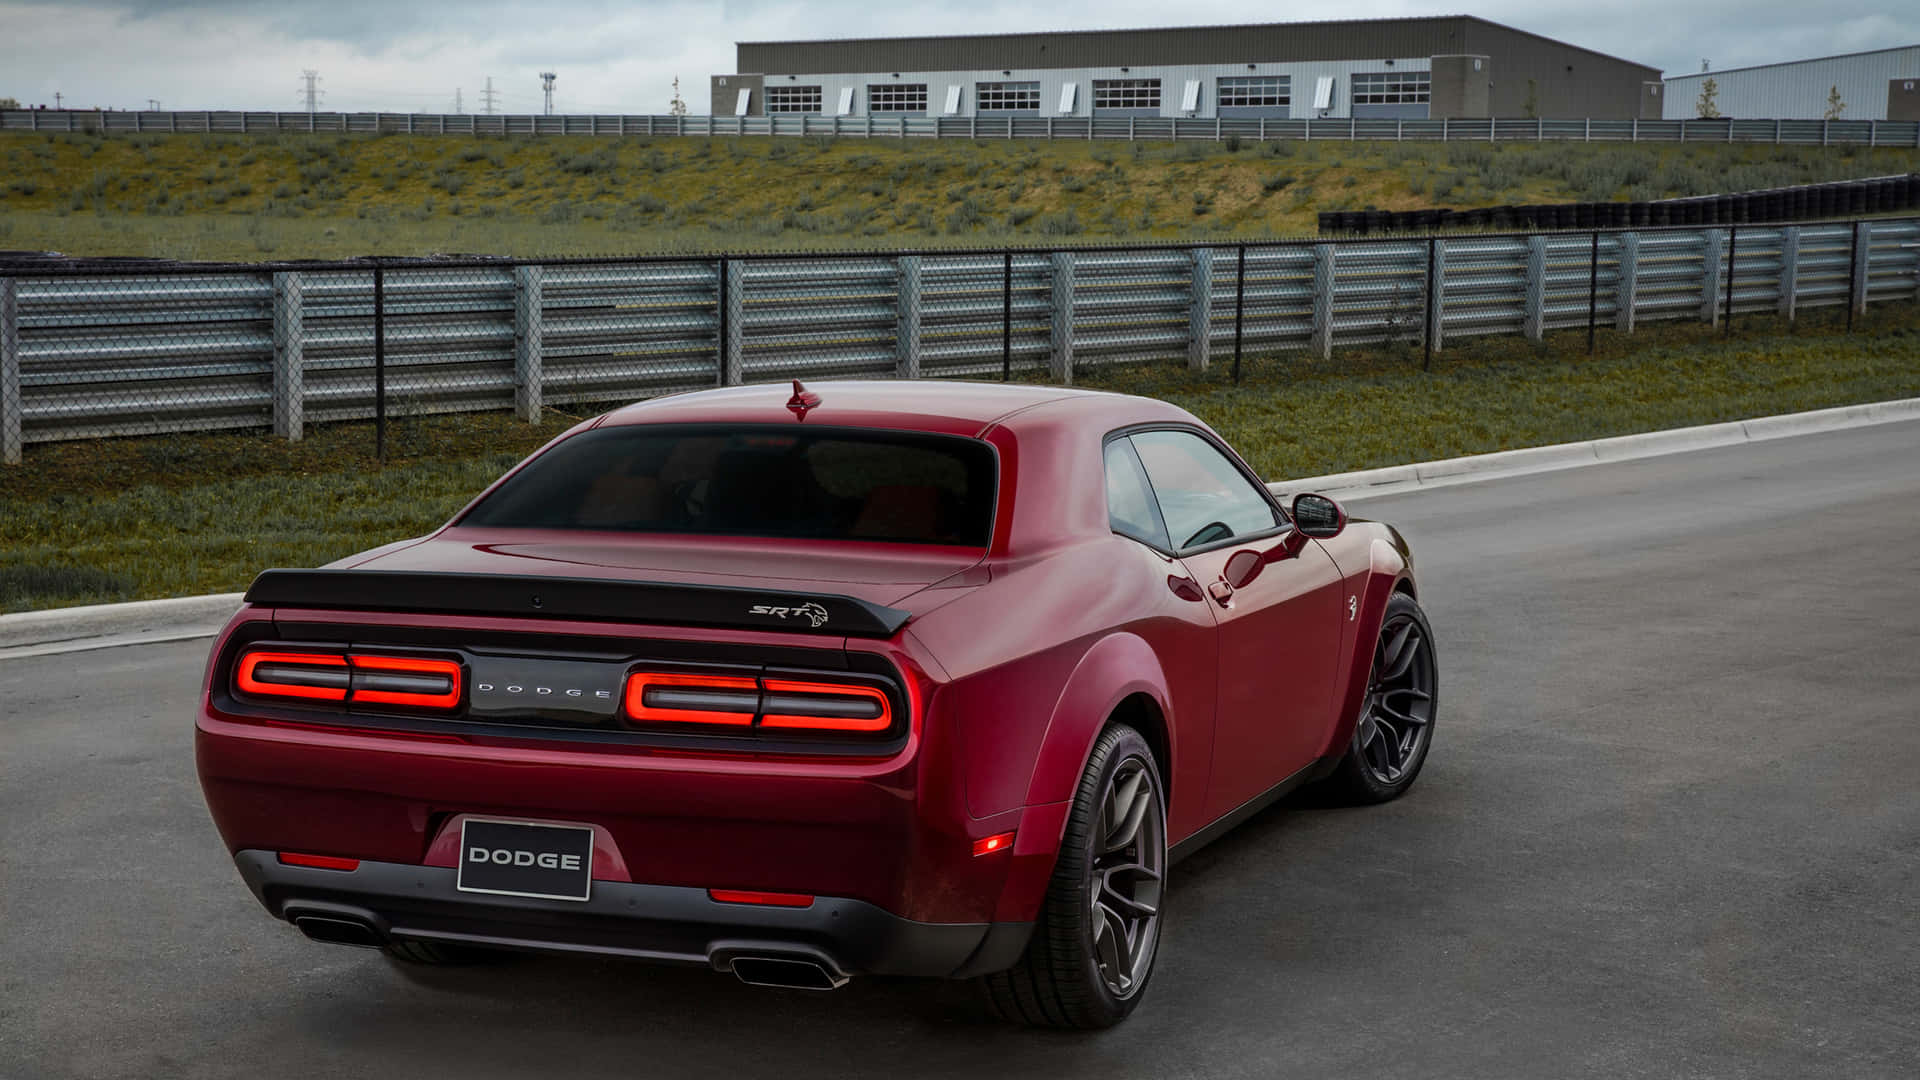 "Feel the raw power of the Dodge Hellcat" Wallpaper